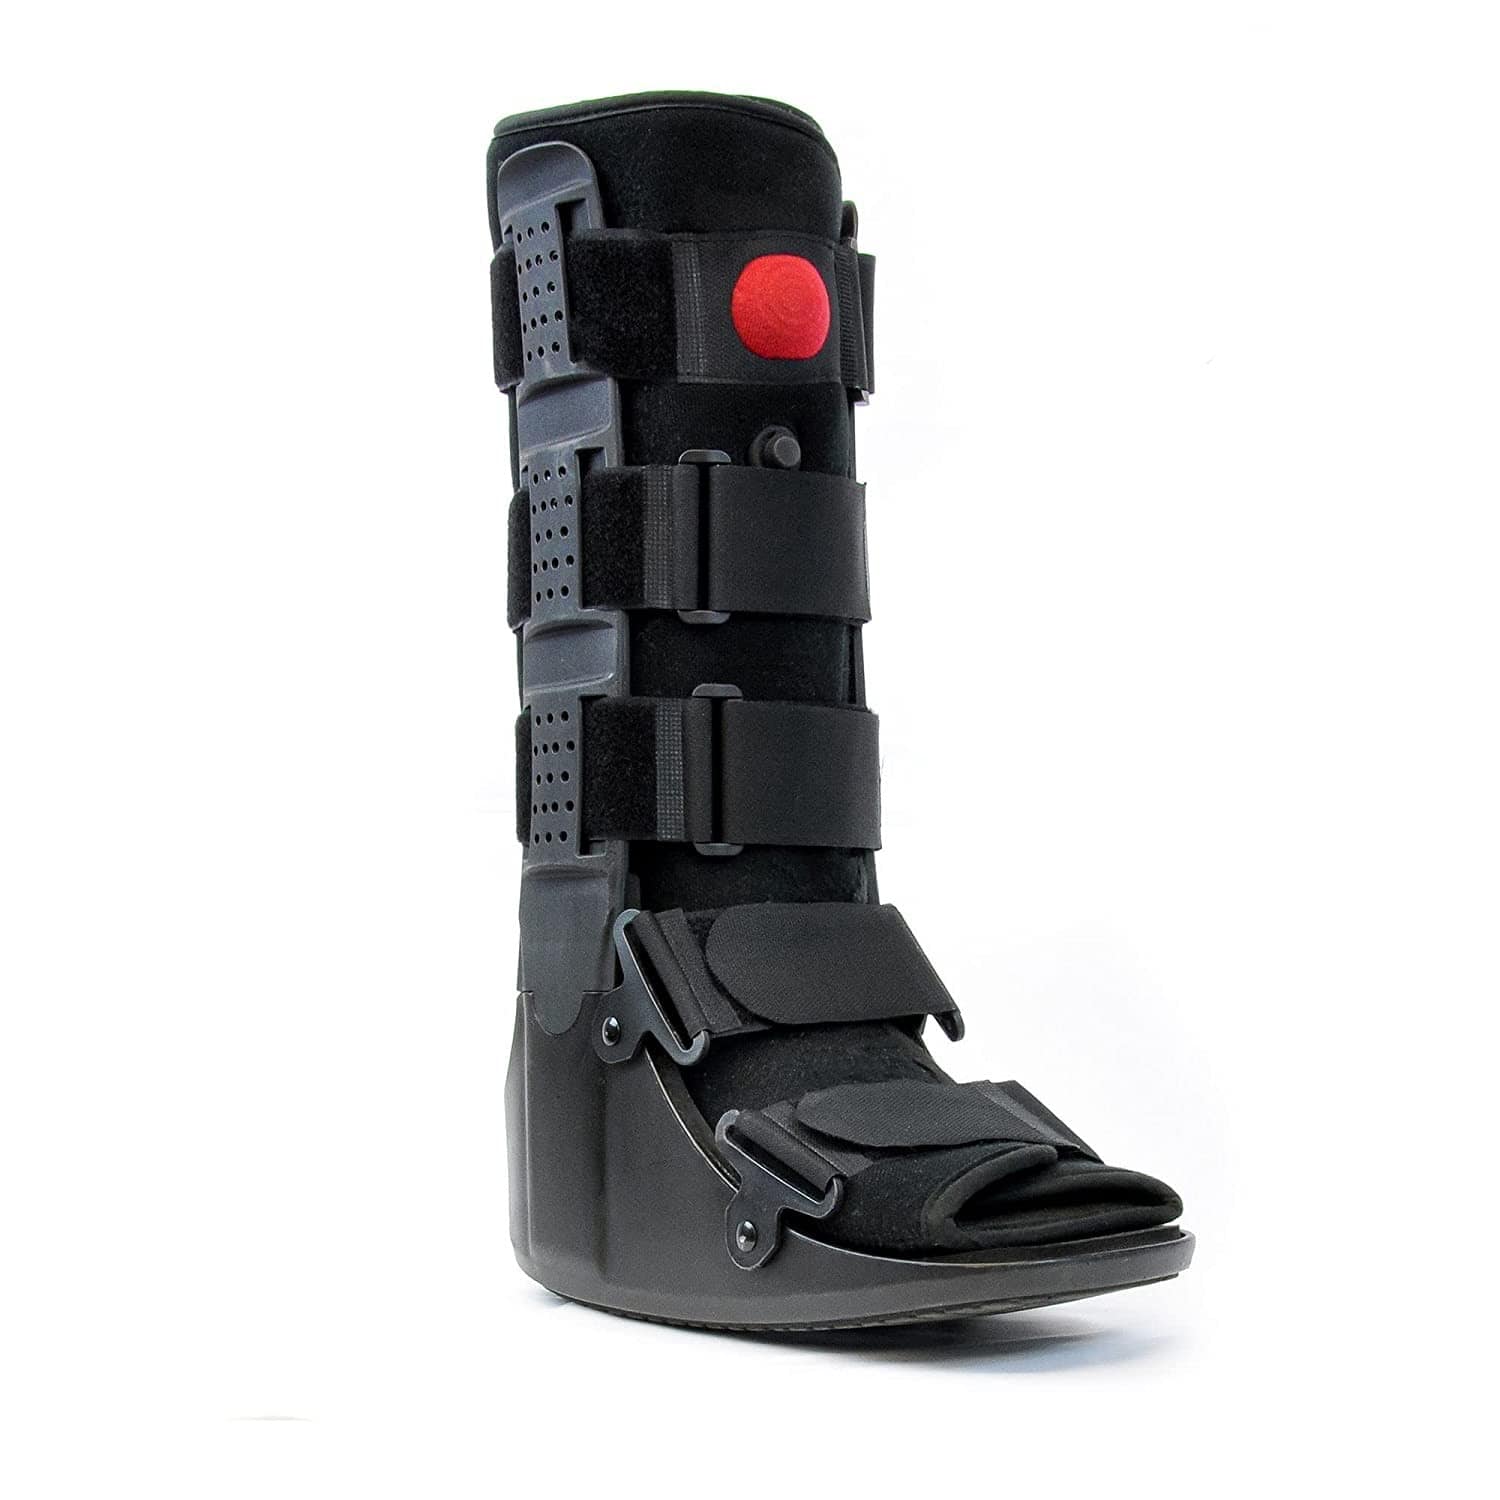 Cam walker boot used for fractures and tendon injury